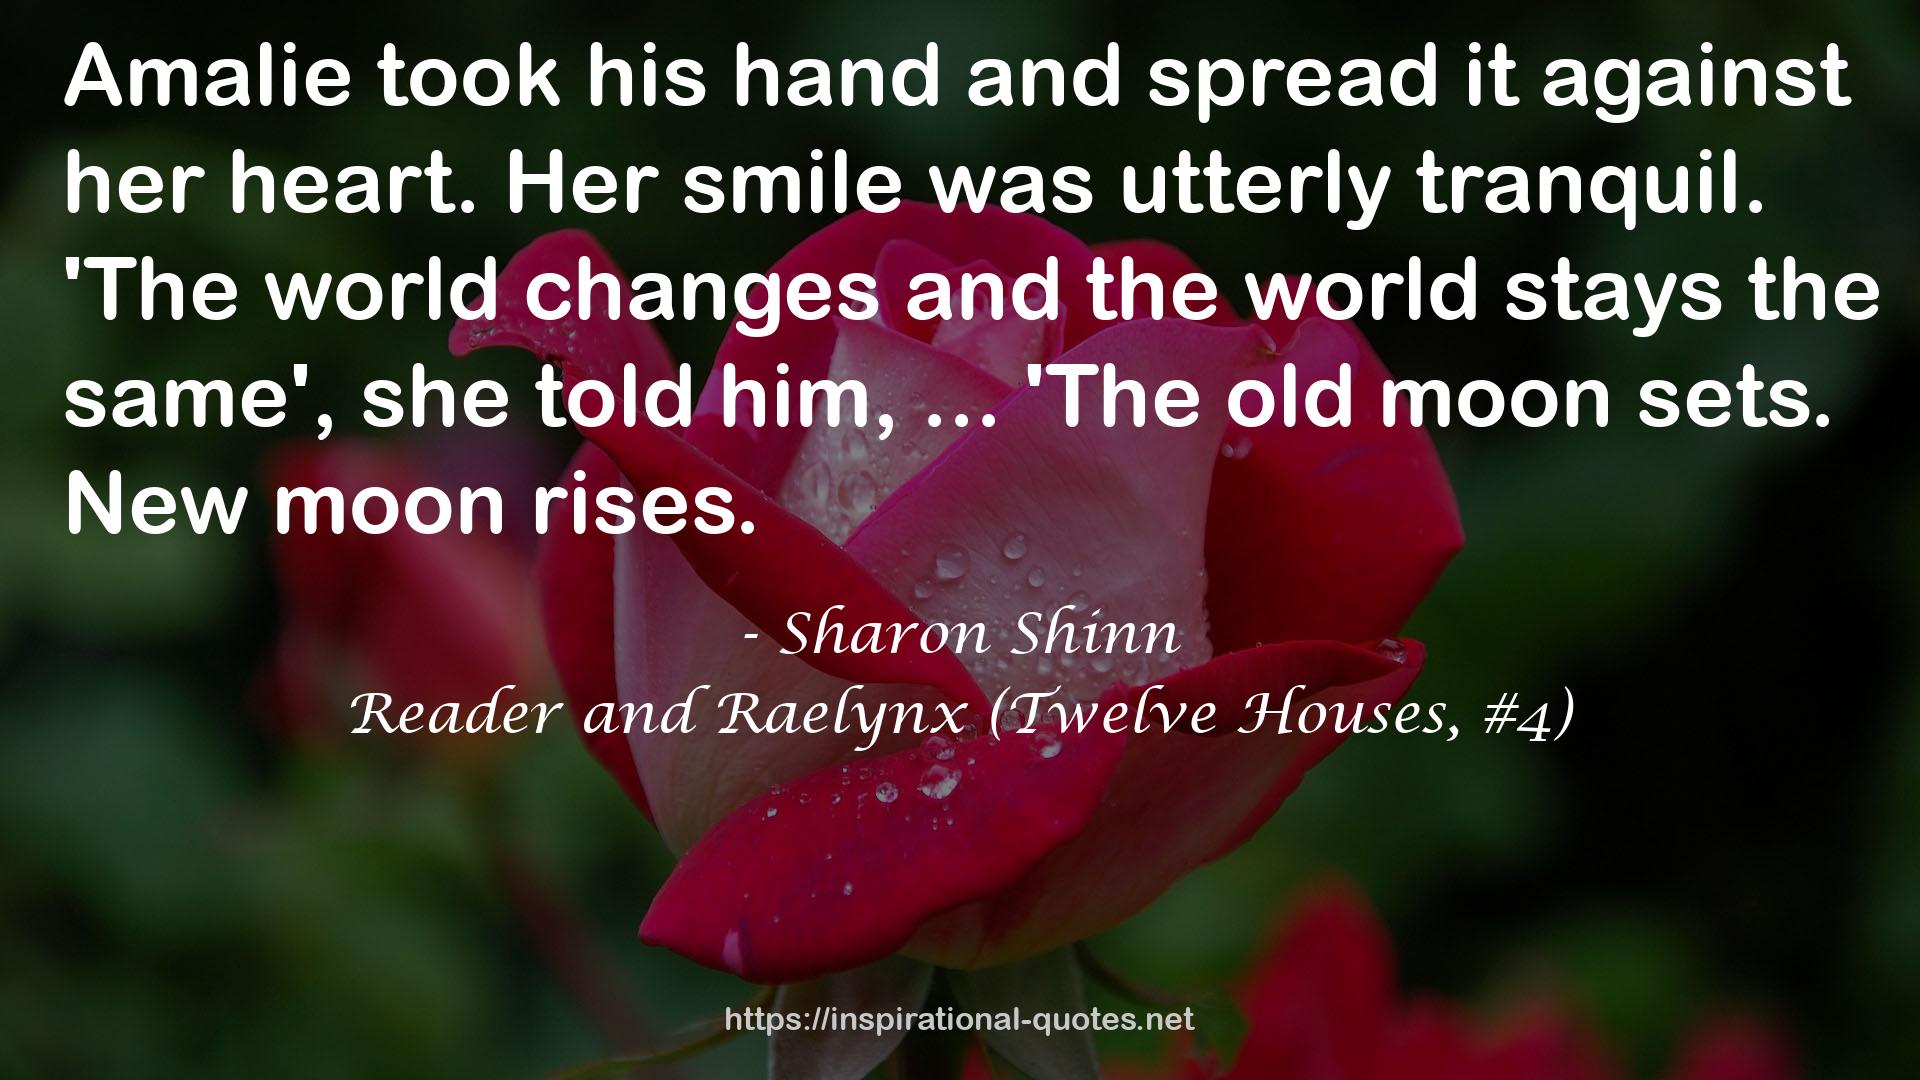 Reader and Raelynx (Twelve Houses, #4) QUOTES